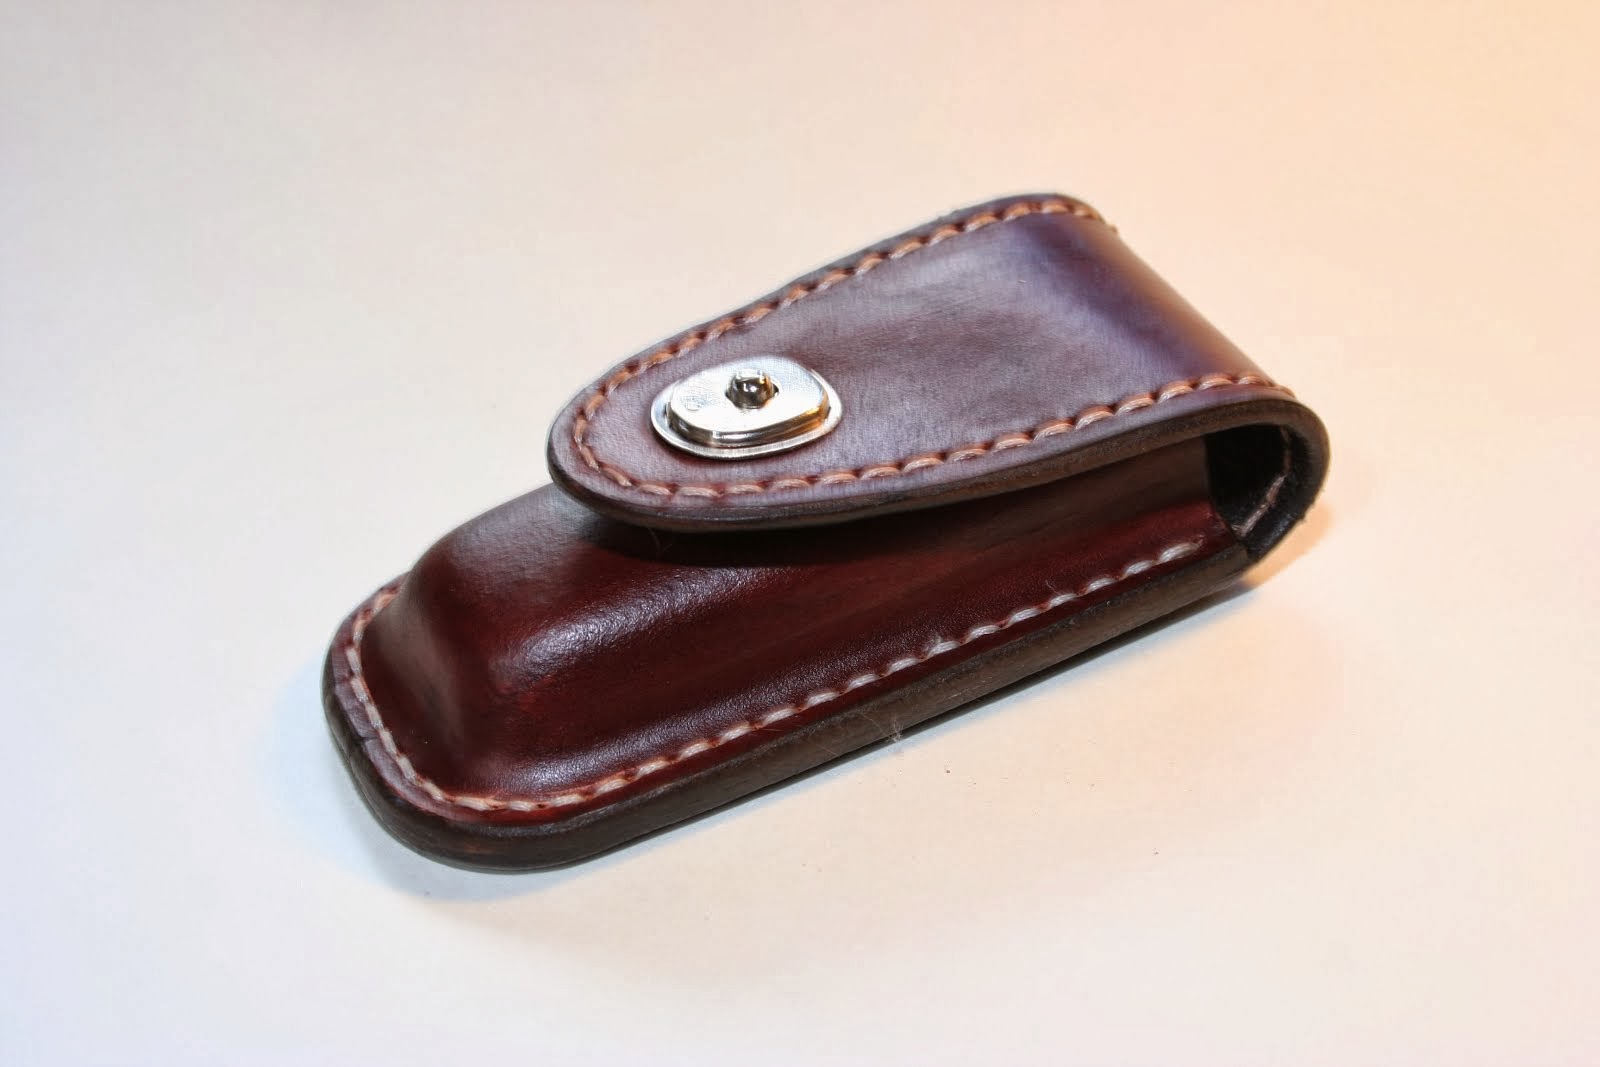 Stitched 'Leatherman' pouch with Lift the dot fastner